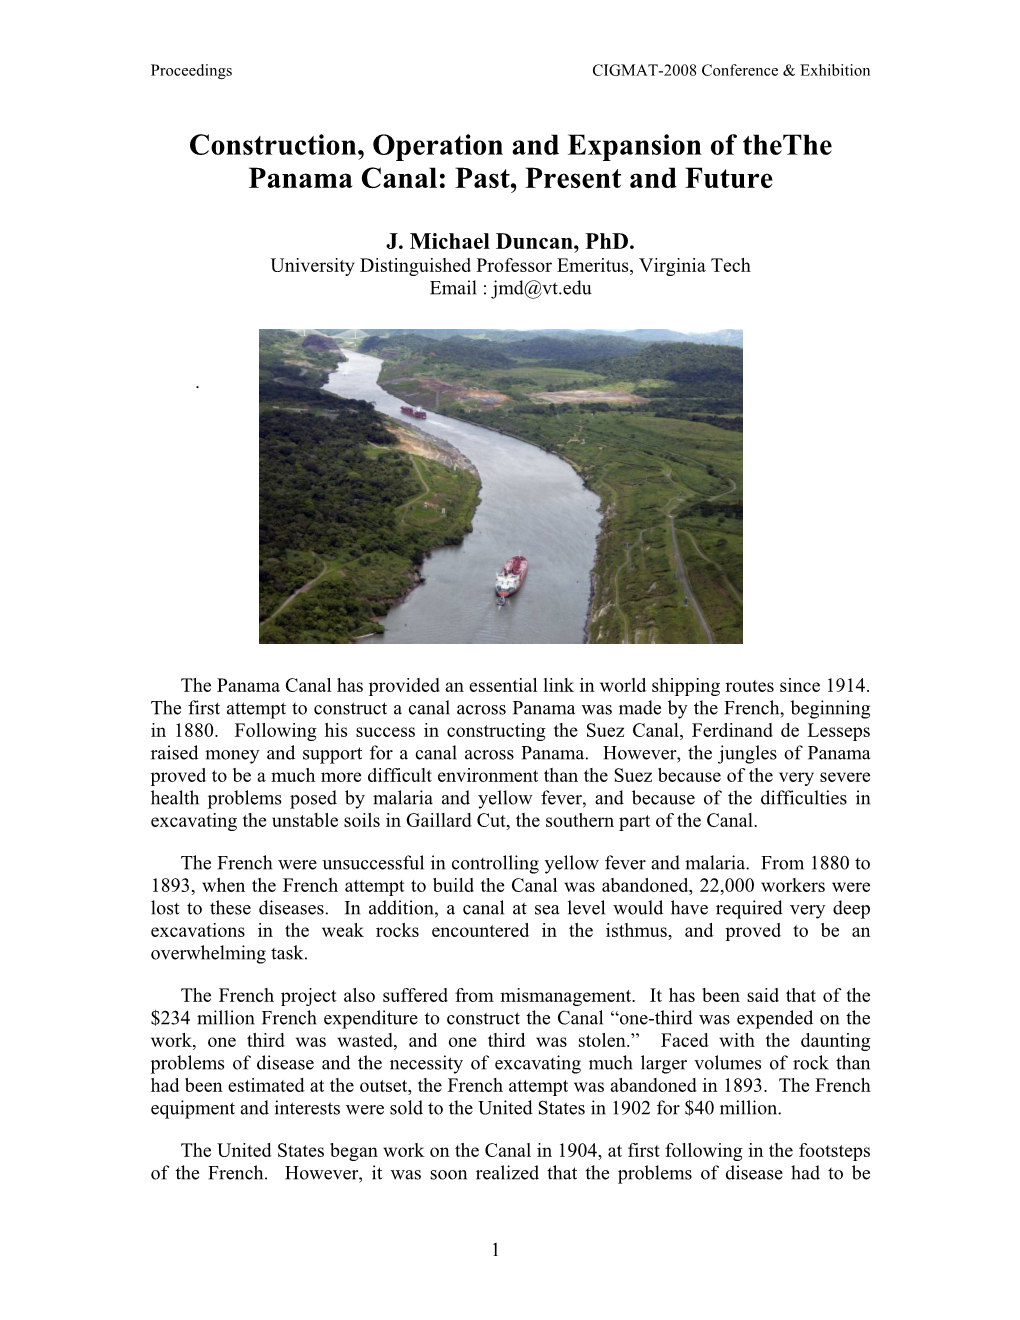 Construction, Operation and Expansion of Thethe Panama Canal: Past, Present and Future